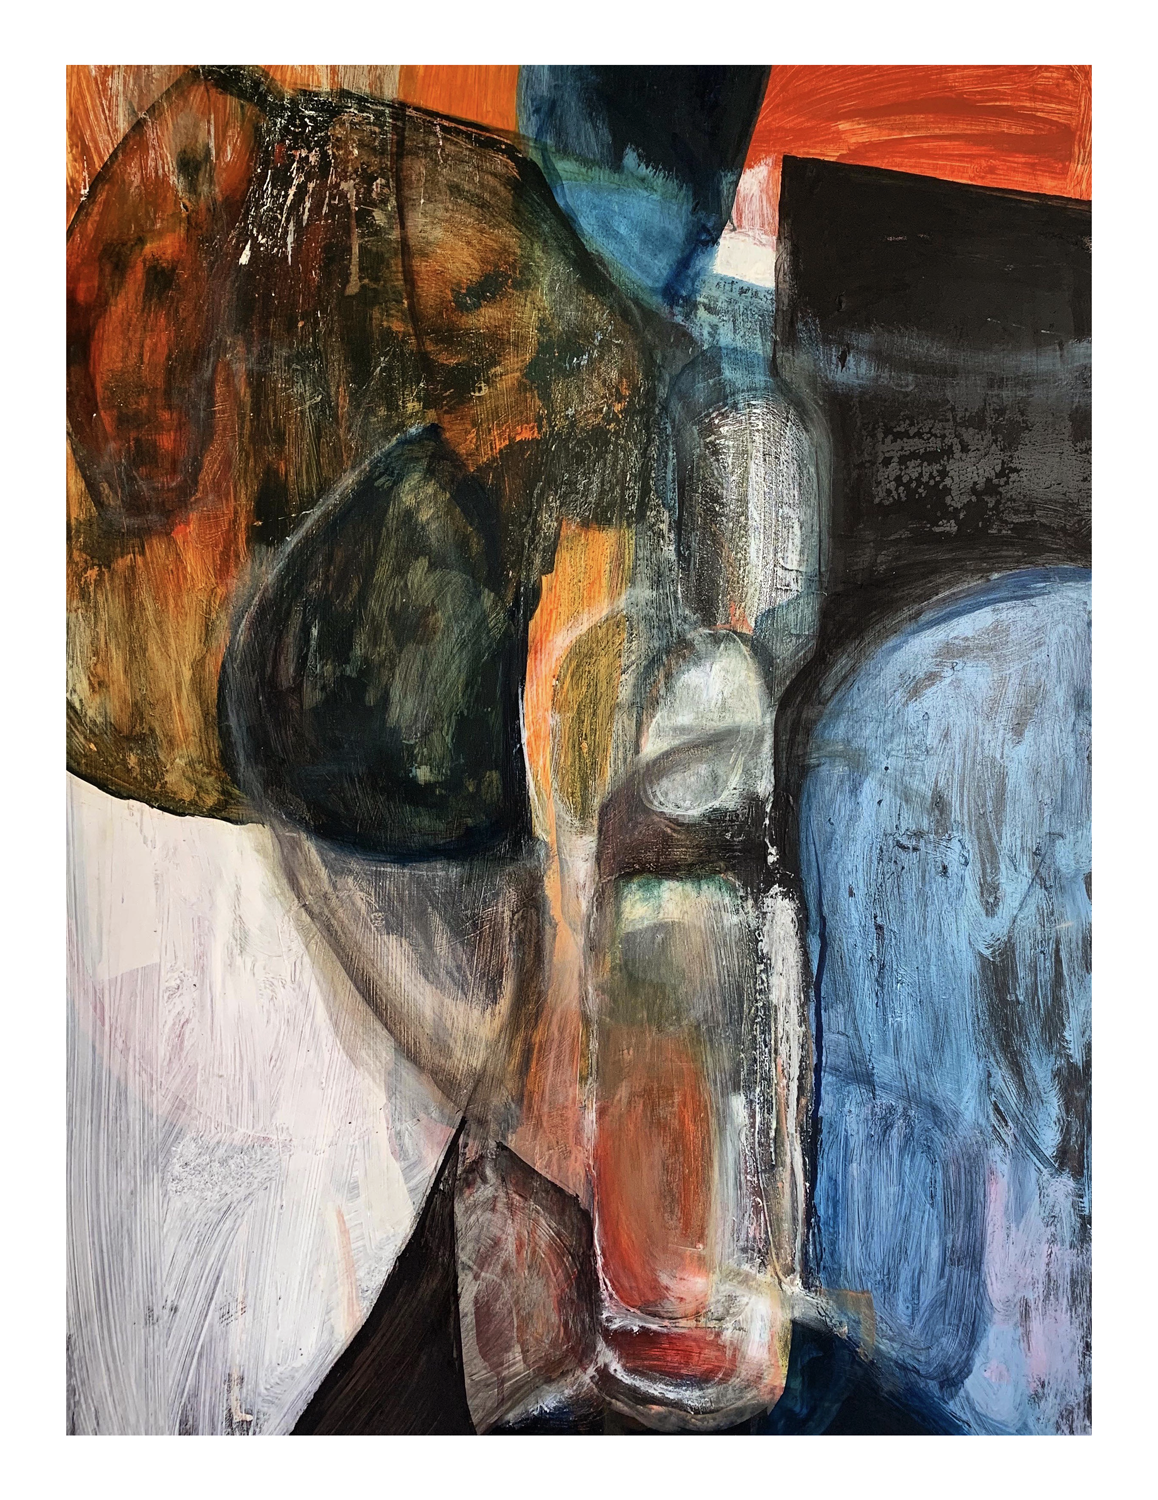 Abstraction painting with the use of colours including orange, white, blue and black. This work has layers of transparent sections which create depth.